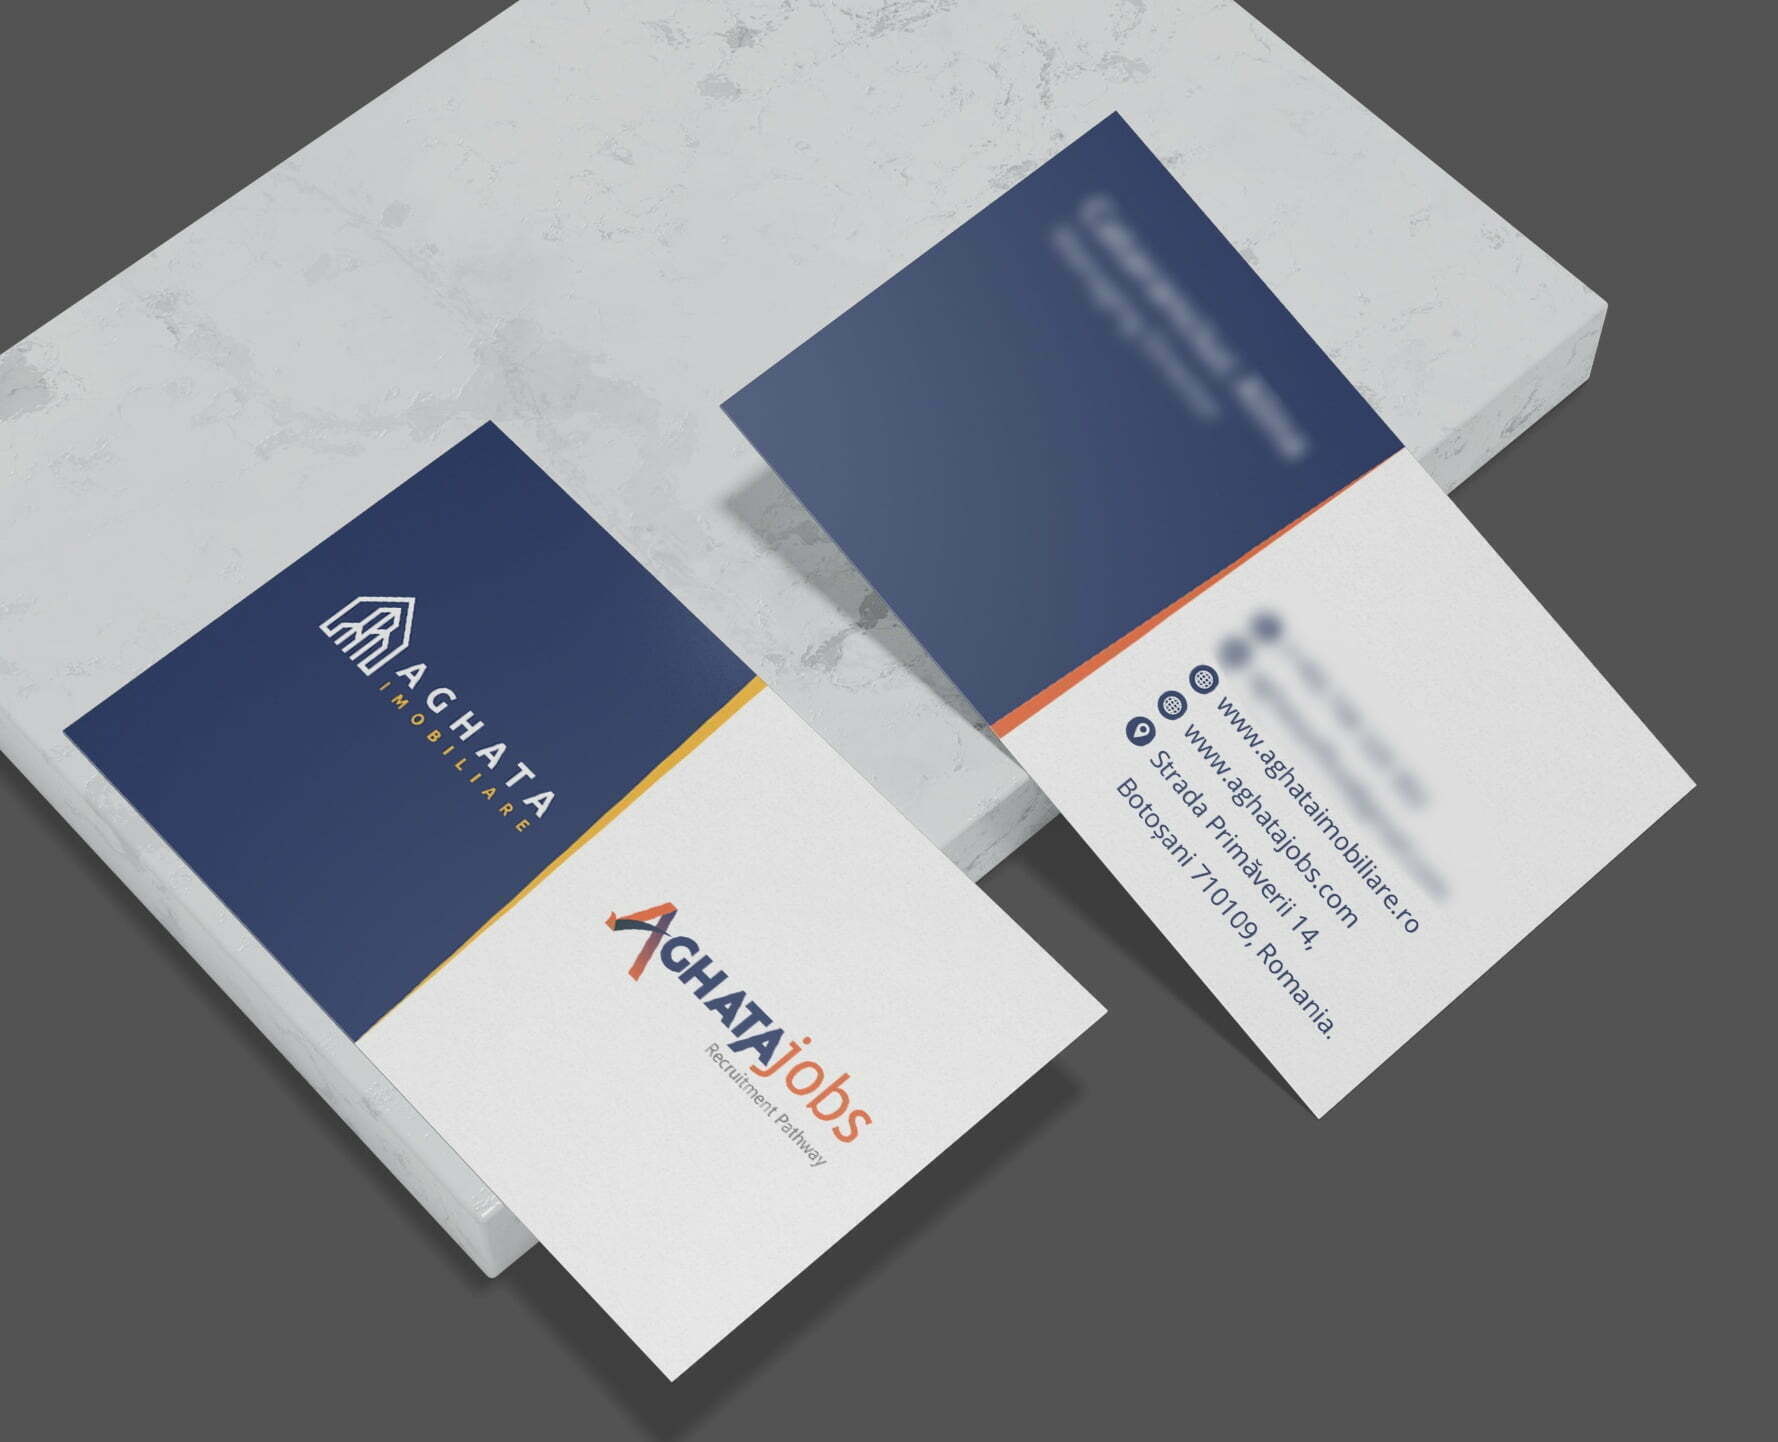 Logo with Business Card designed for Aghata Jobs.